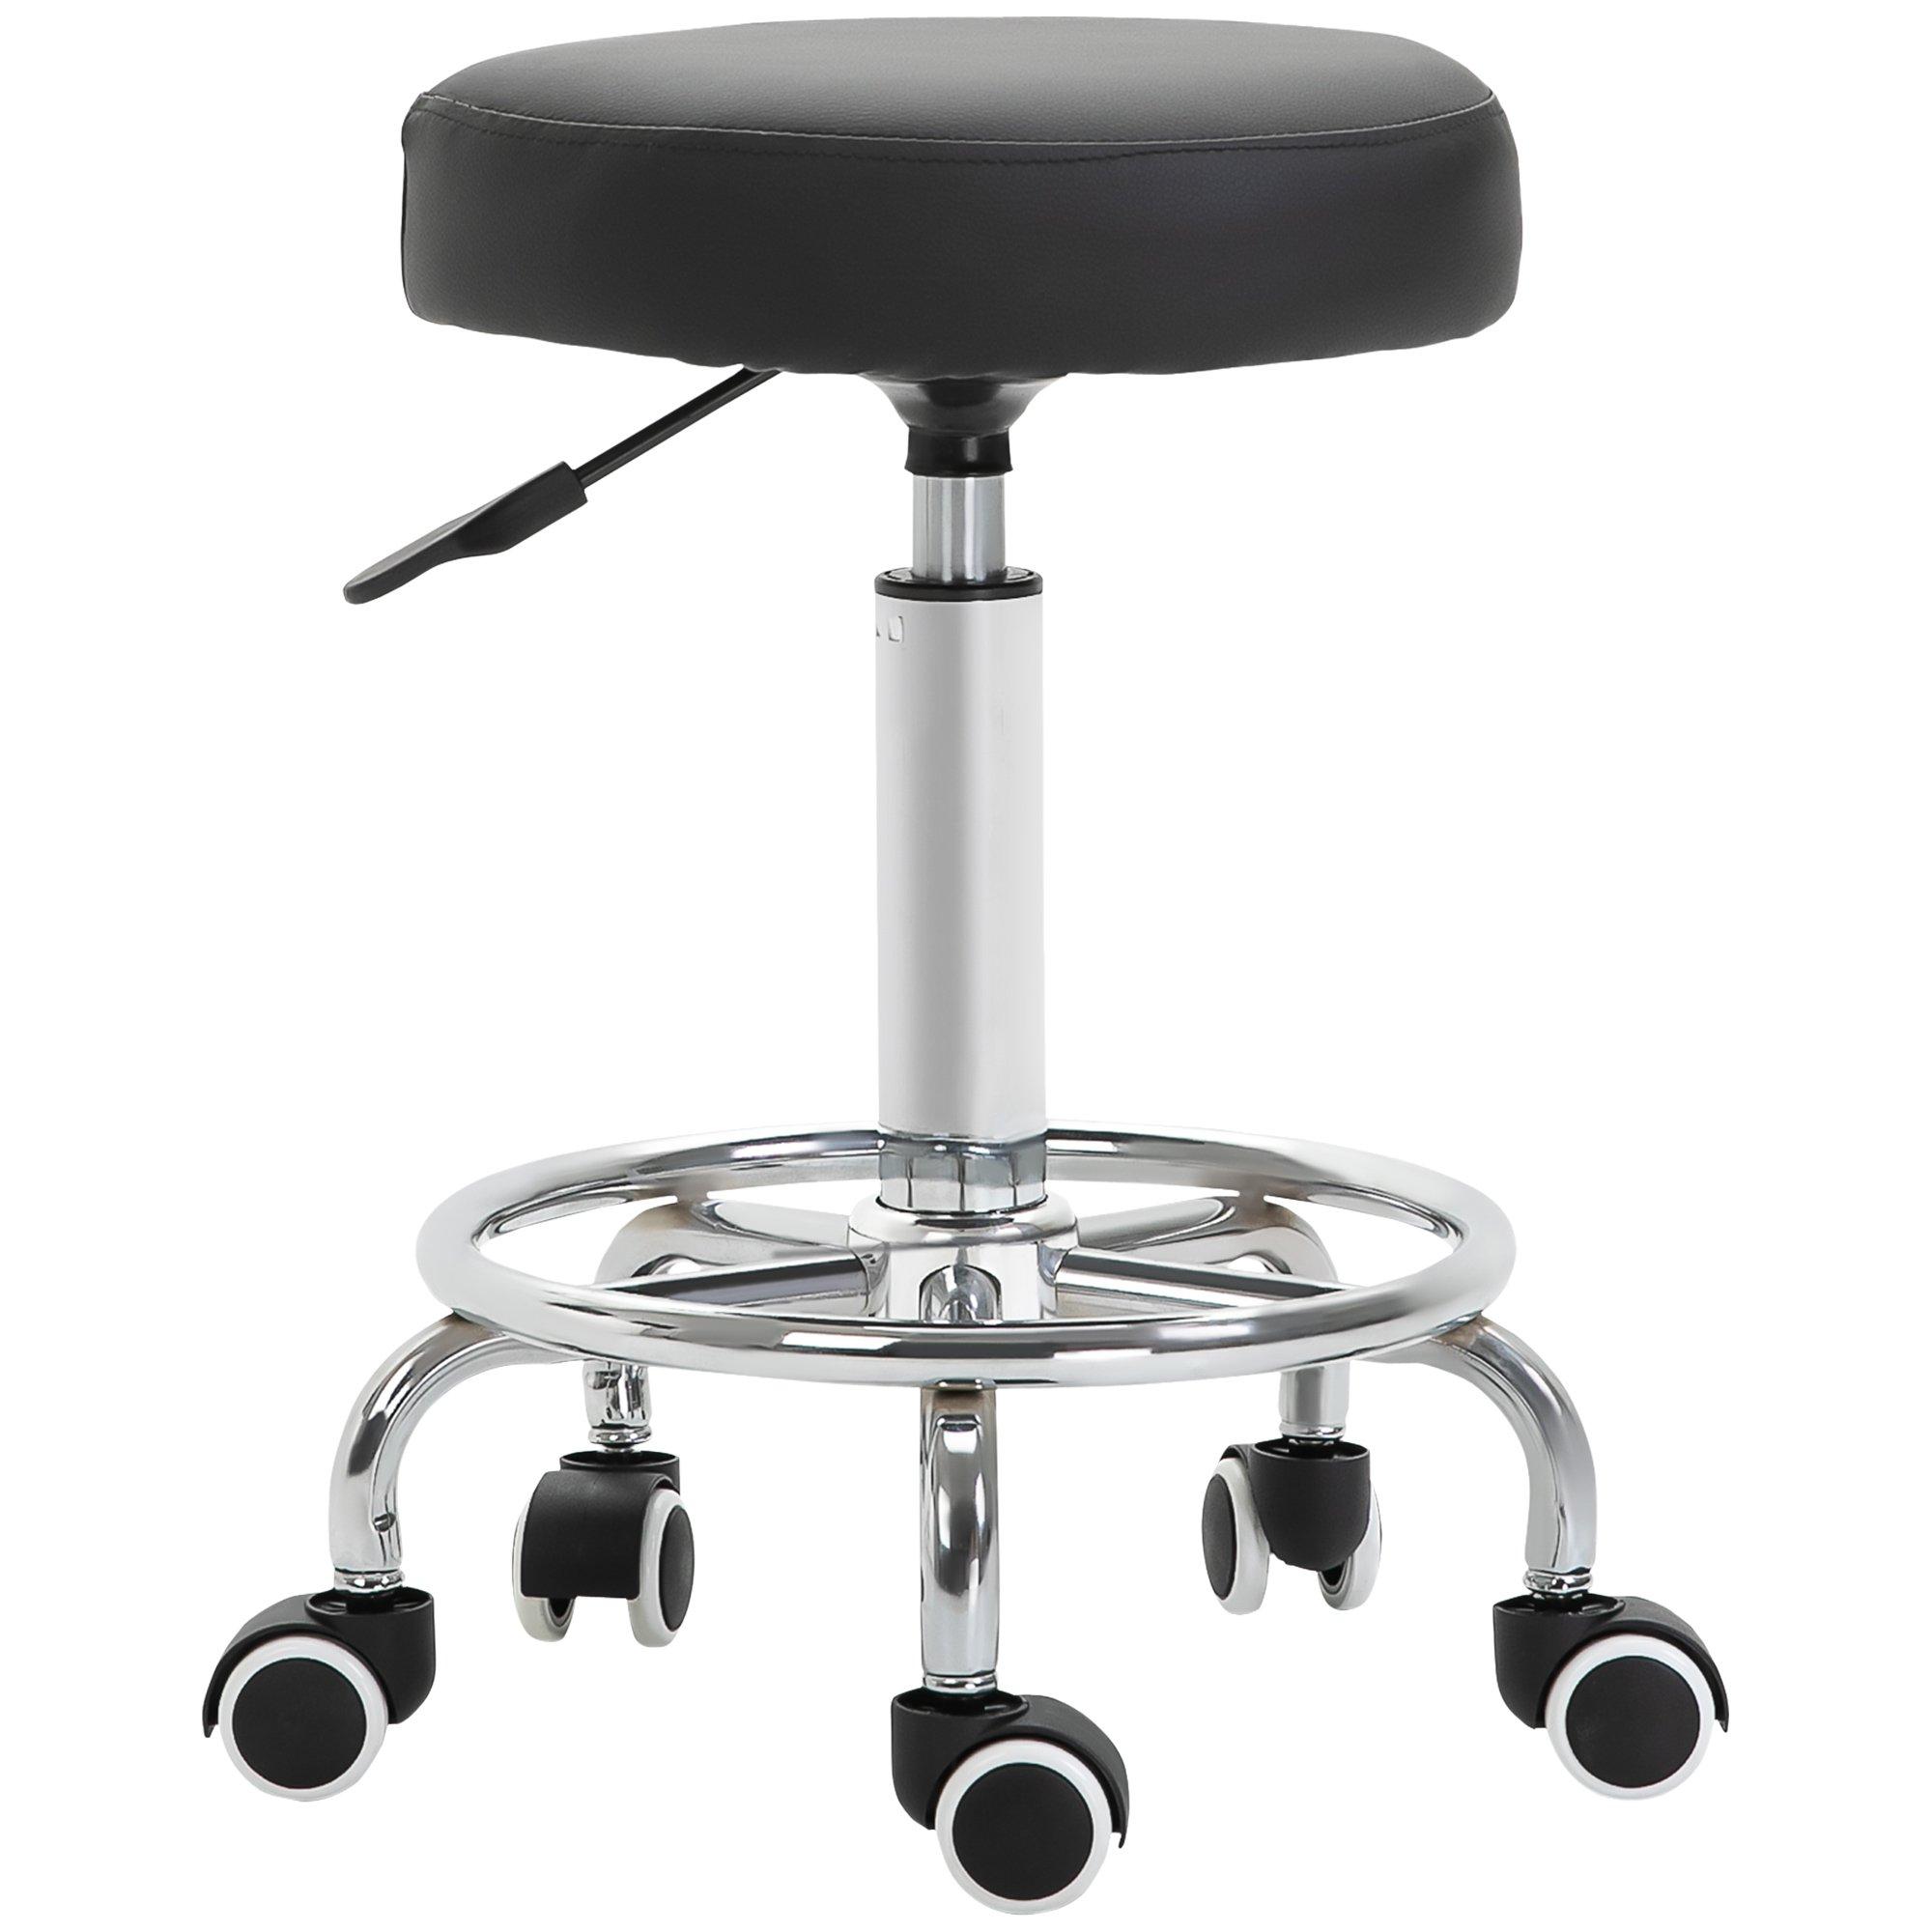 PU Leather Salon Working Beautician Stool Adjustable Height with Footrest